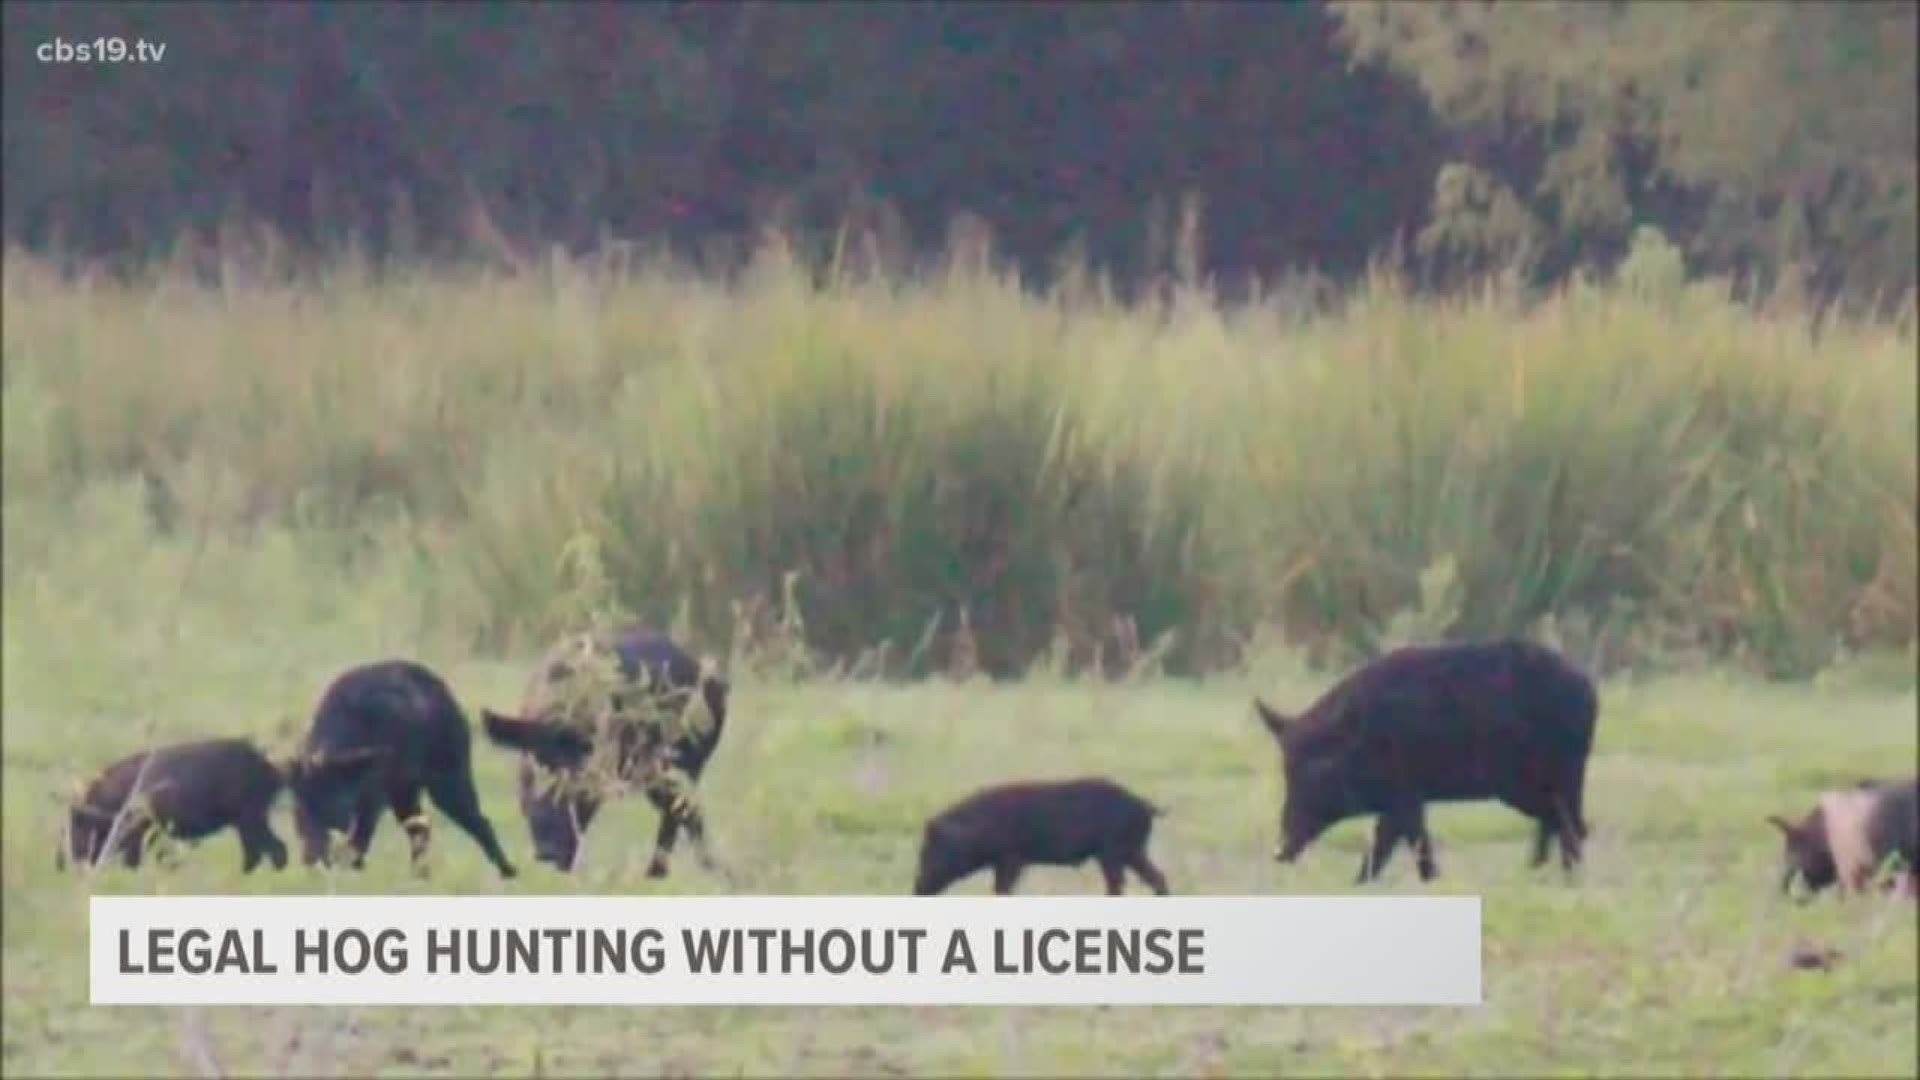 Gov. Abbott signed a bill allowing hunting of wild hogs without a license on May 31st.